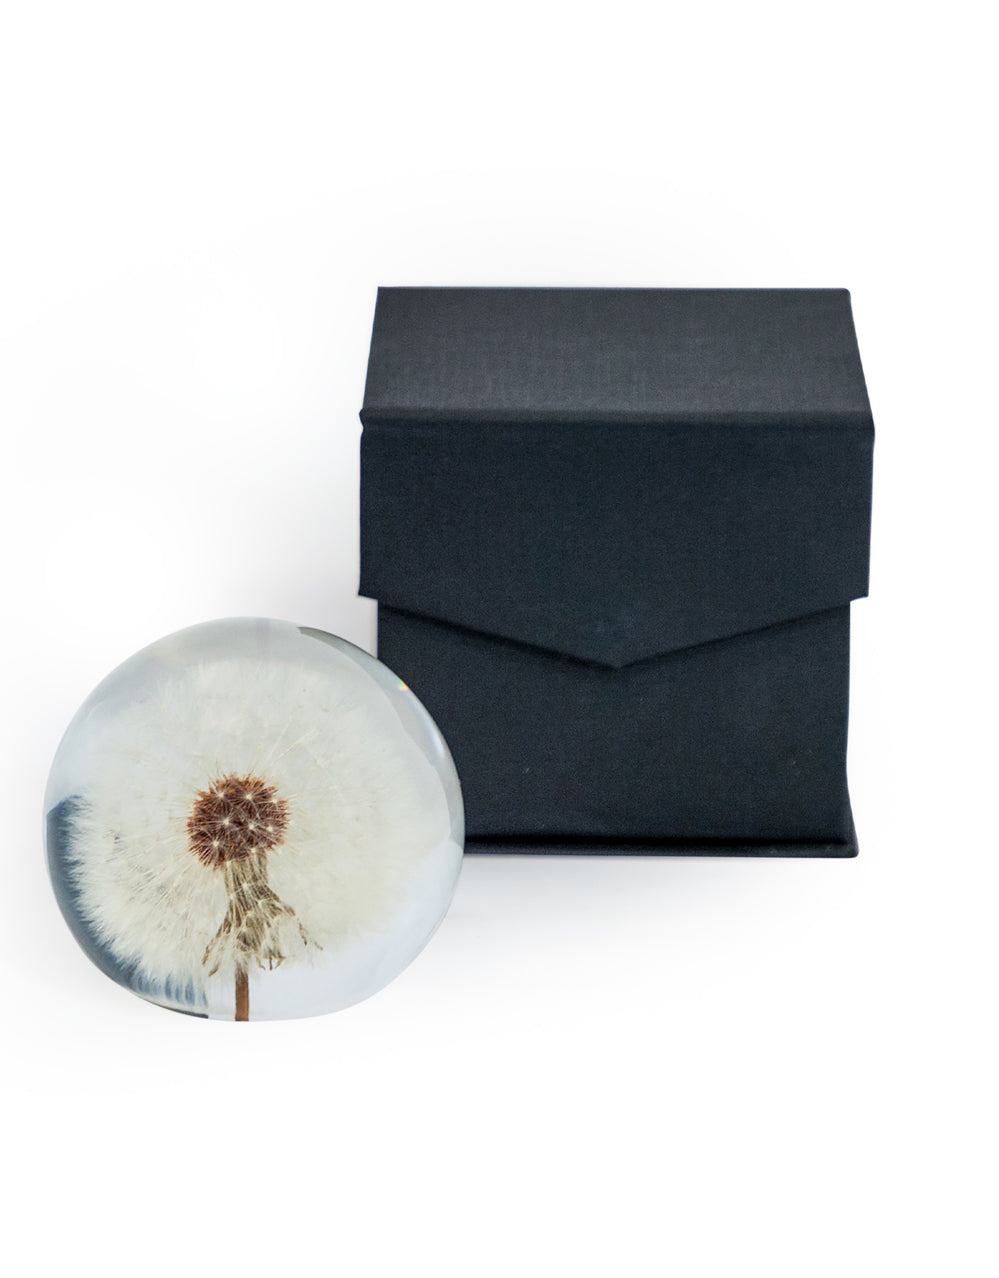 Large Round Acrylic Glass Real Dandelion Paperweight with Gift Box